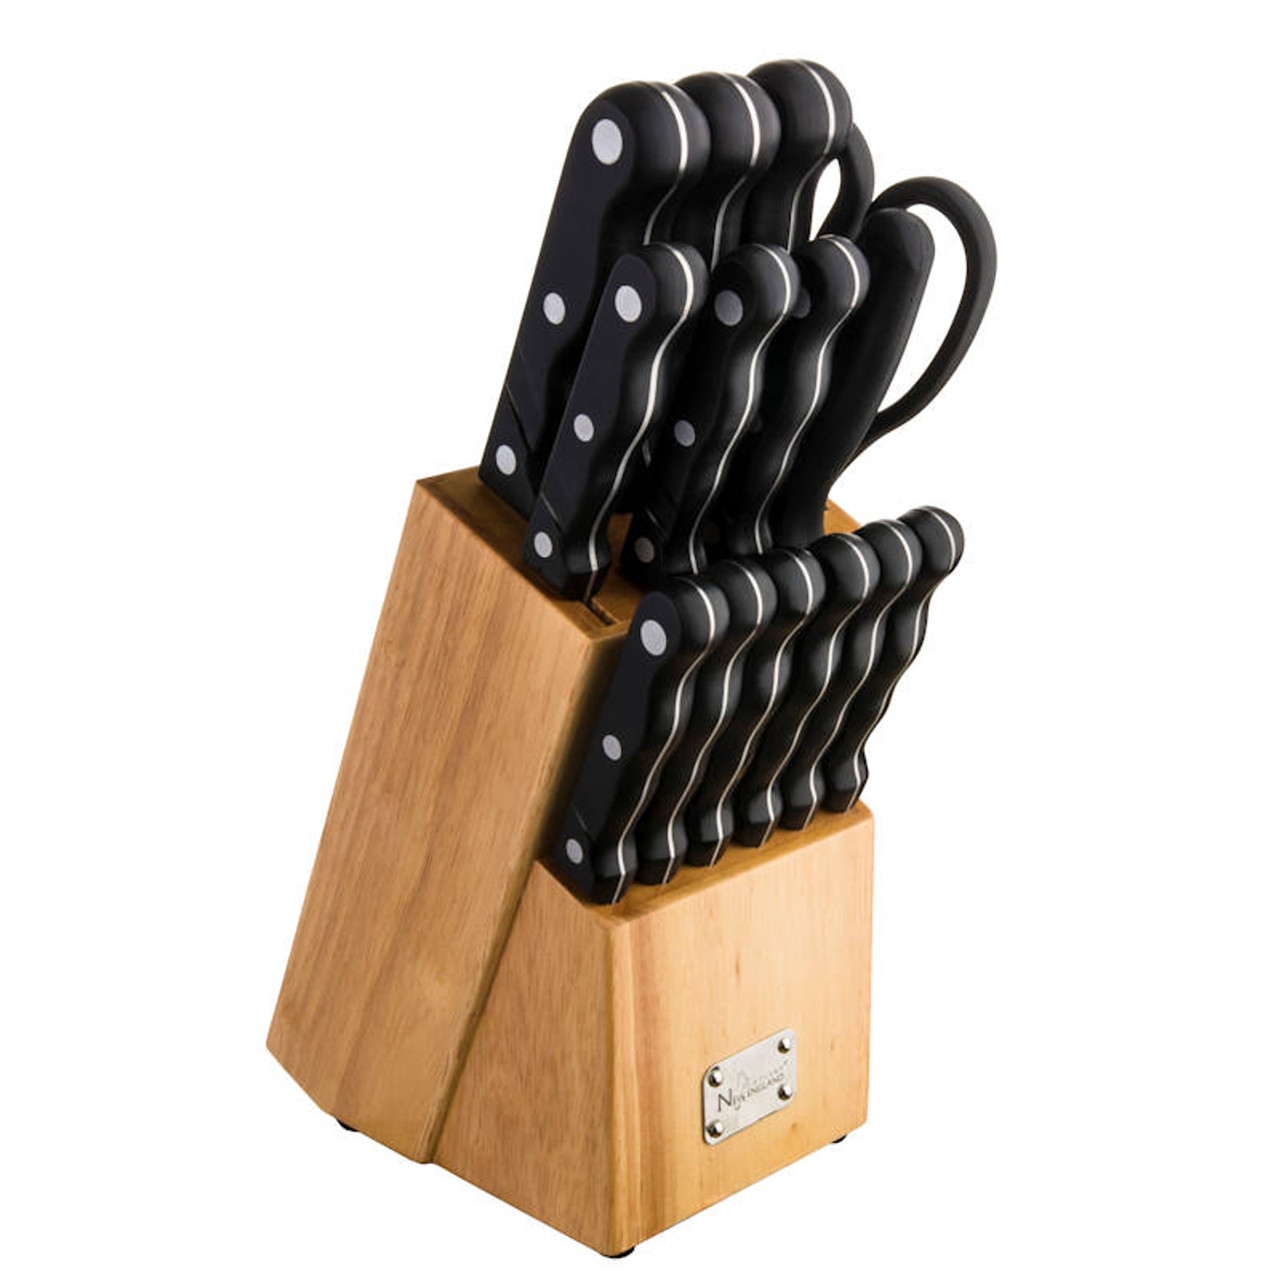 https://cdn11.bigcommerce.com/s-q0oajb576s/images/stencil/1280x1280/products/1304/3603/premium-15-pc-knife-block-sets-with-shears-high-carbon-stainless-steel-blades-7__86748.1637184323.jpg?c=1